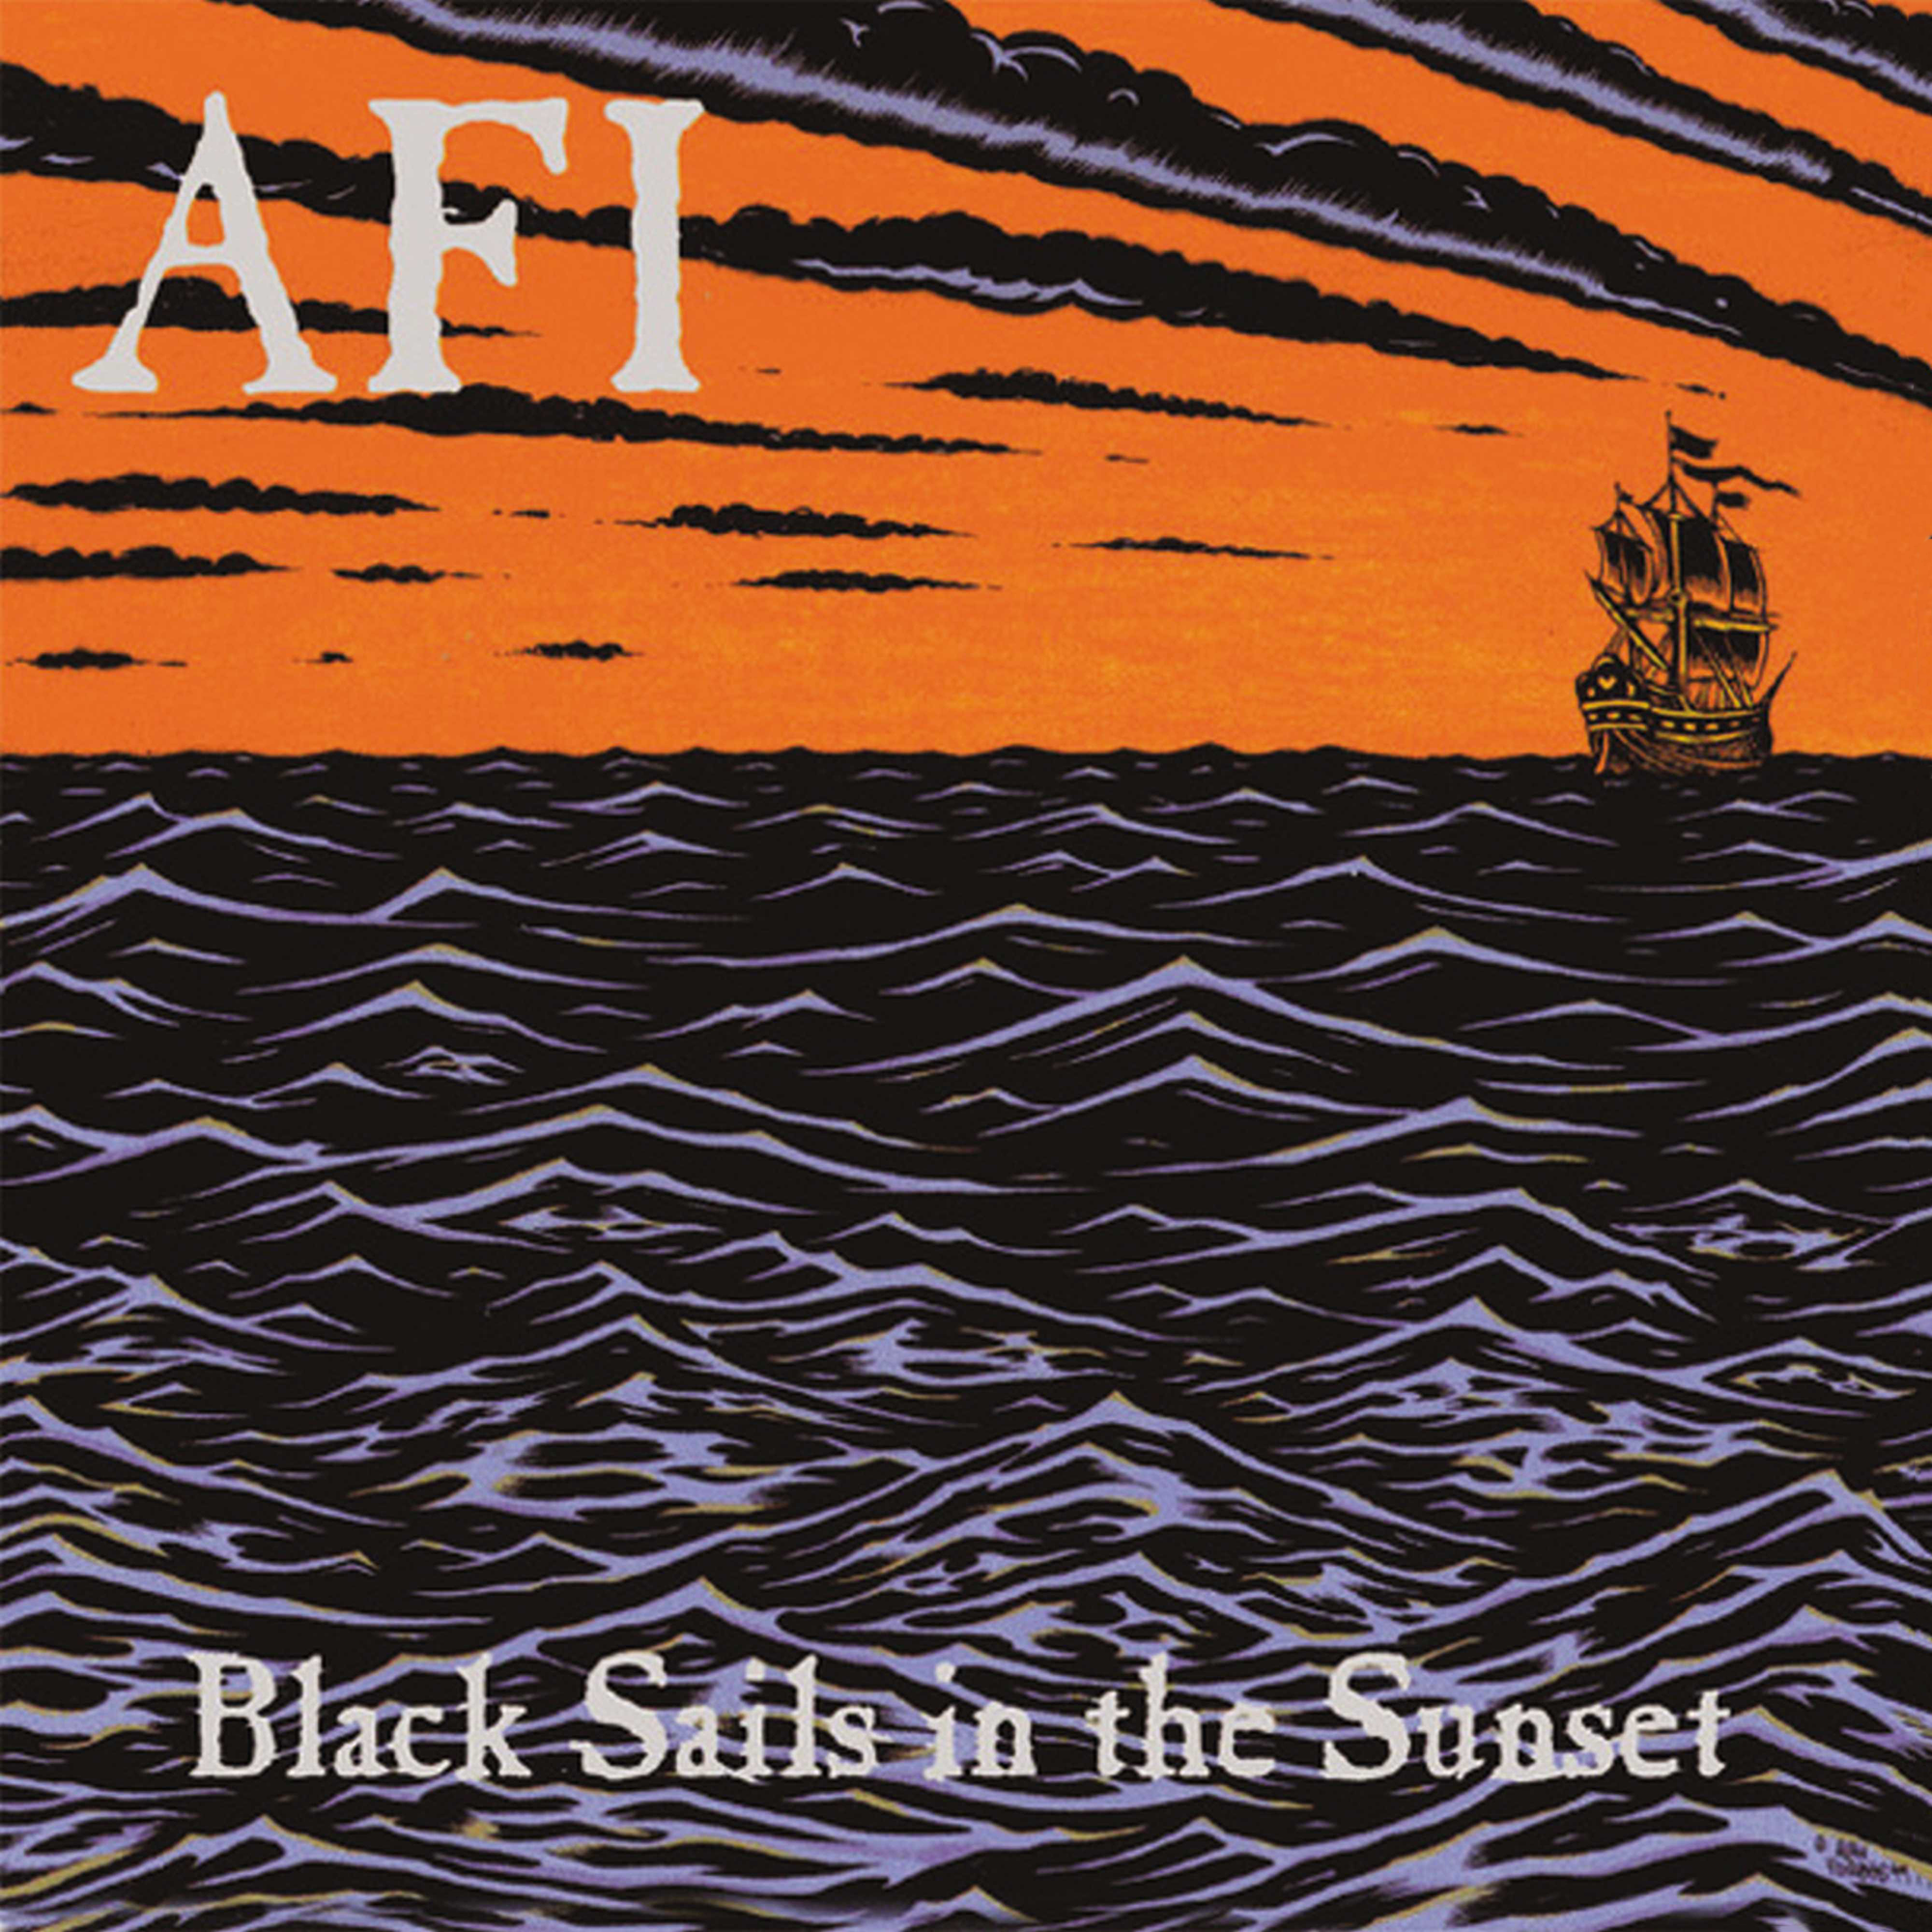 AFI’S BLACK SAILS IN THE SUNSET RETURNS TO VINYL FOR 25TH ANNIVERSARY